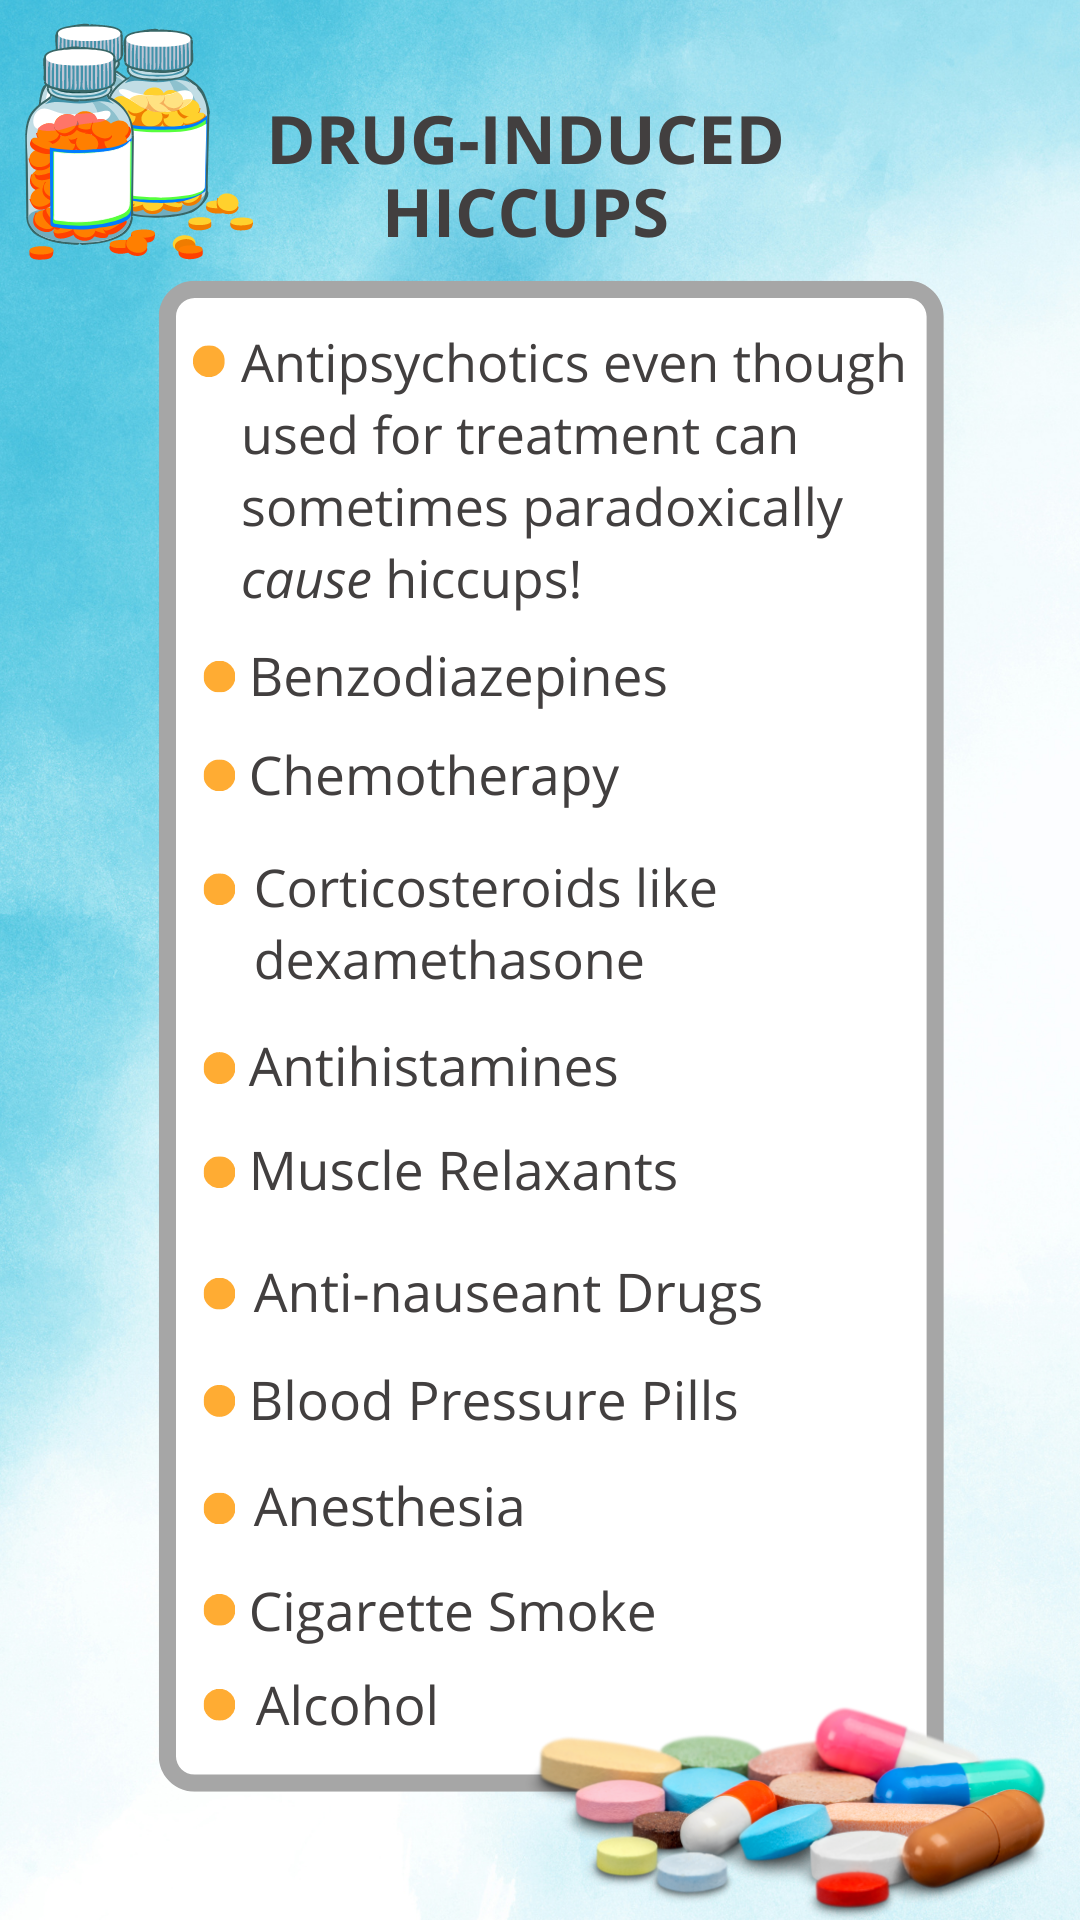 Medications that cause hiccups